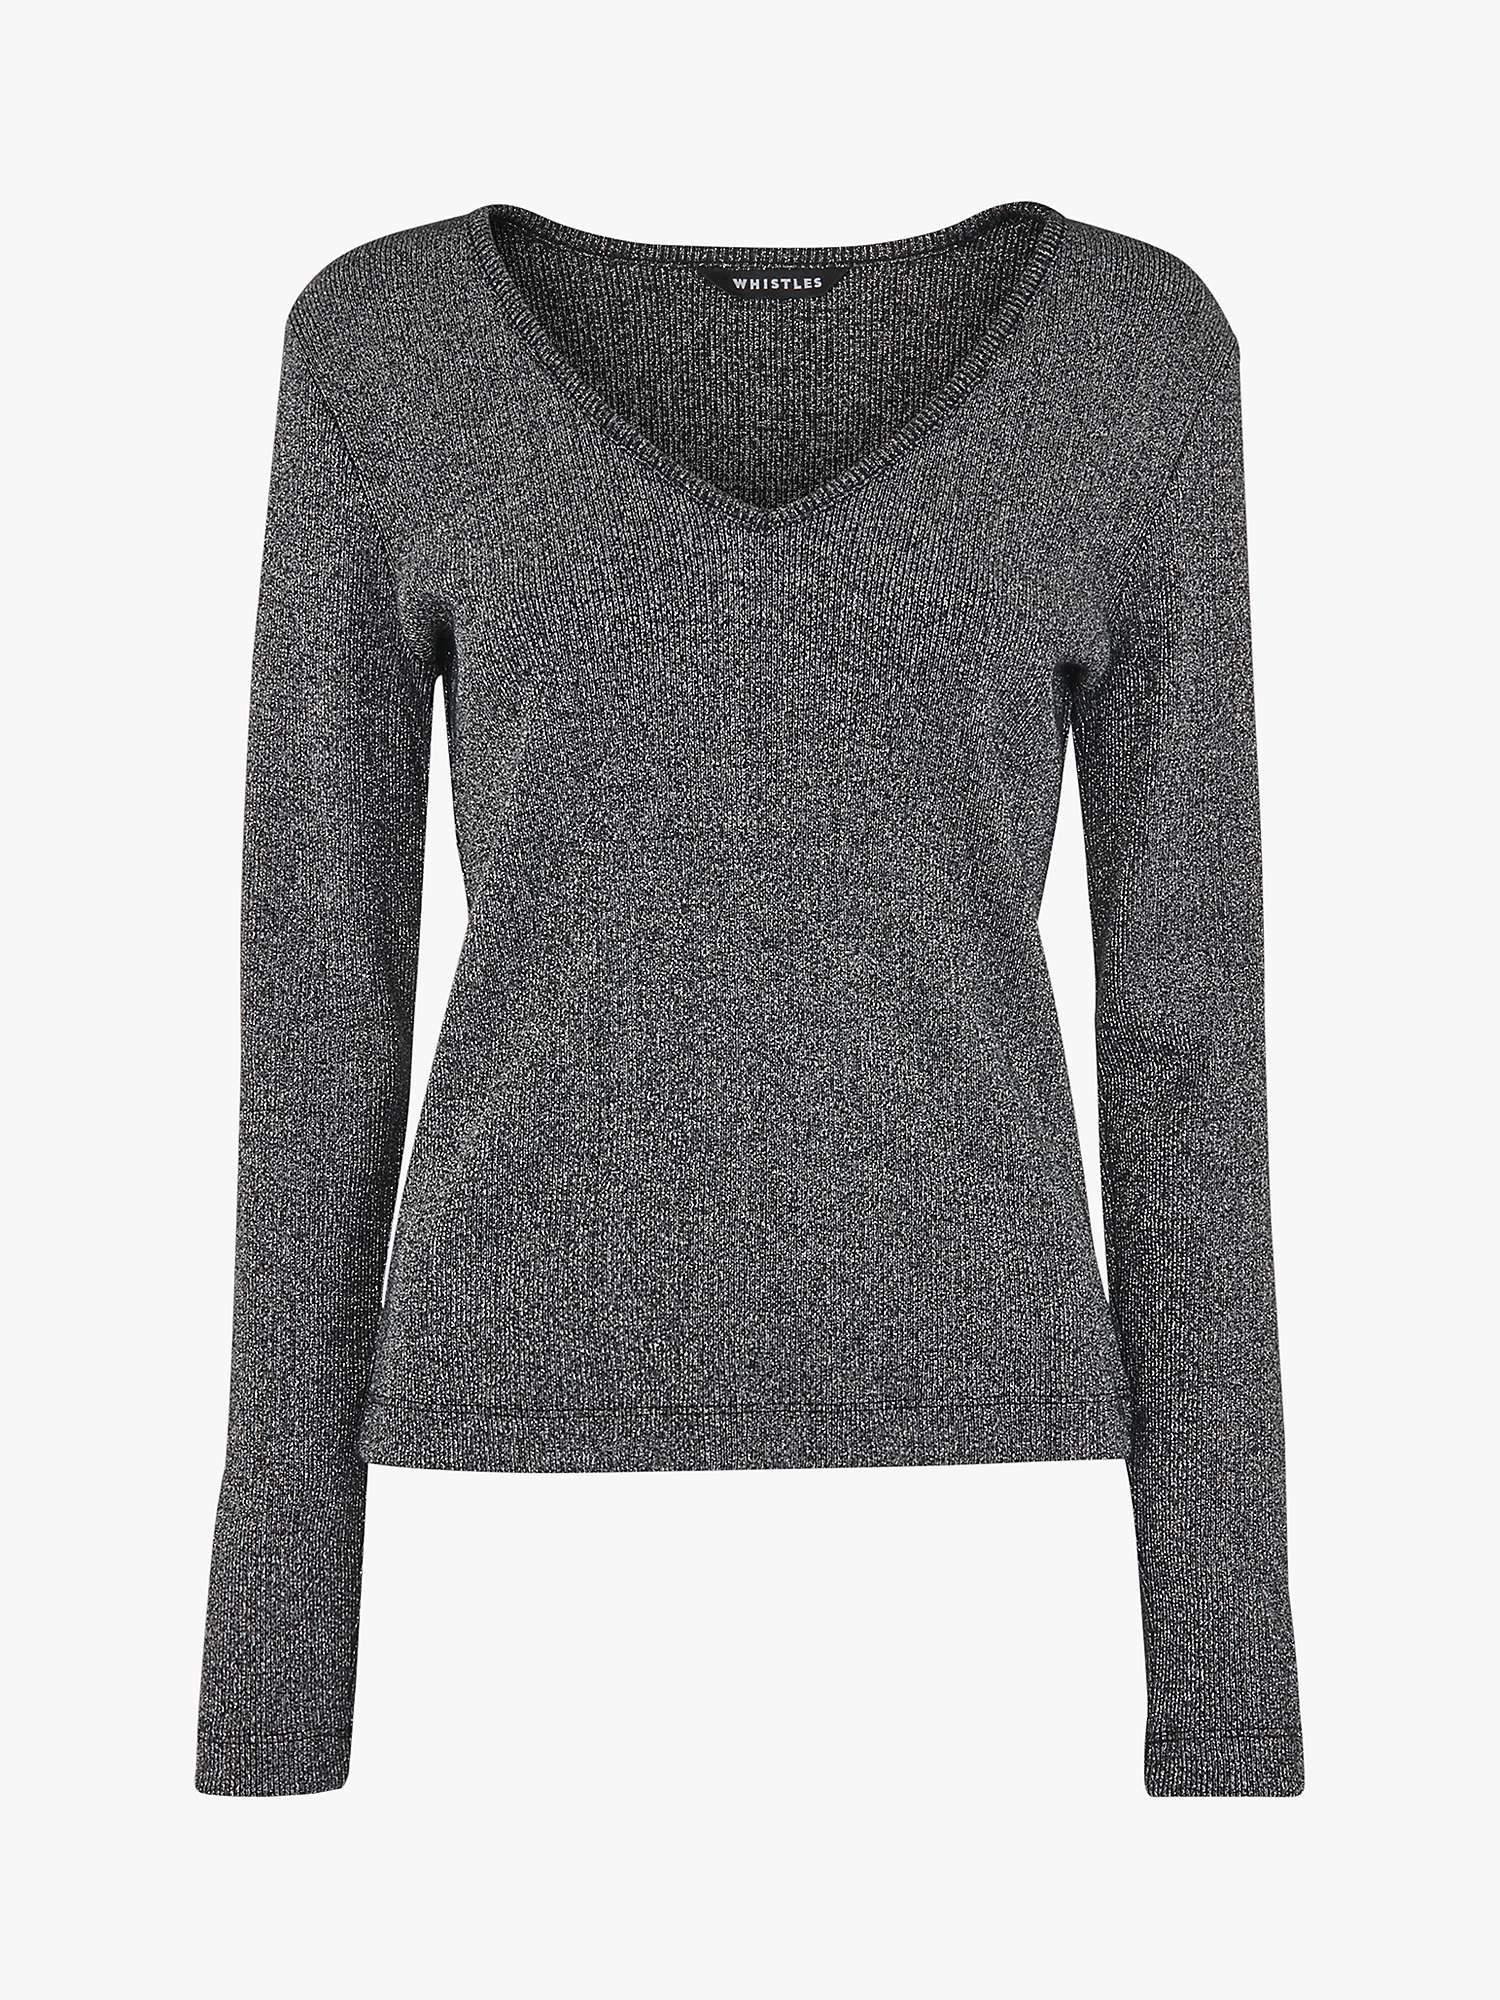 Whistles Sparkle Long Sleeve Top, Black at John Lewis & Partners